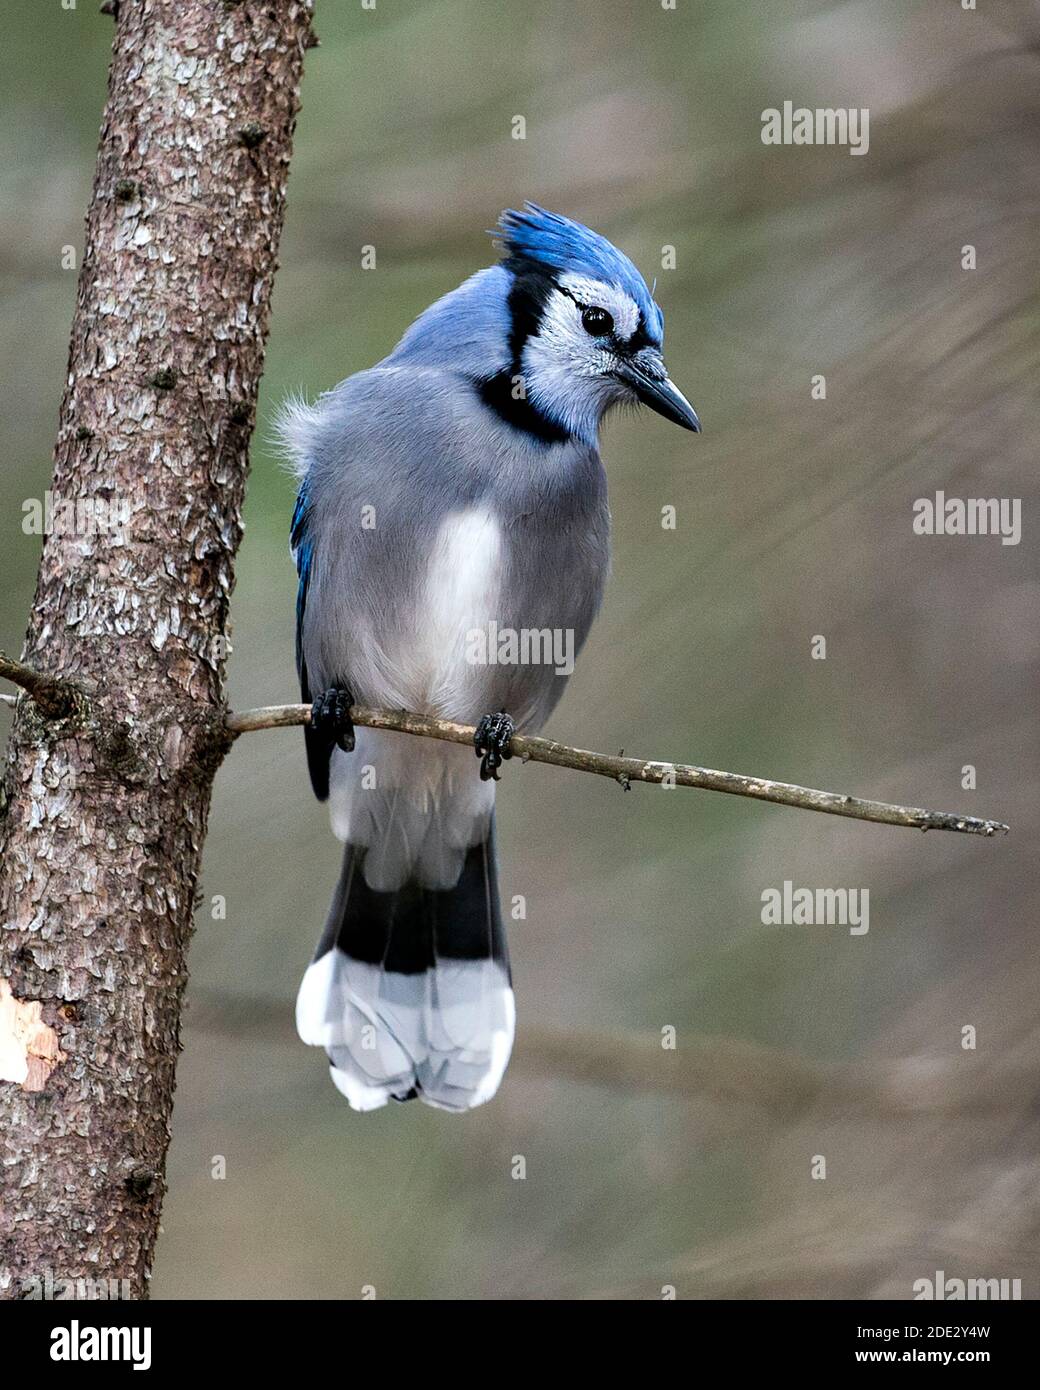 Blue Jay perched on a branch with a blur background in the forest environment and habitat. Image. Picture. Portrait. Looking to the right side. Stock Photo